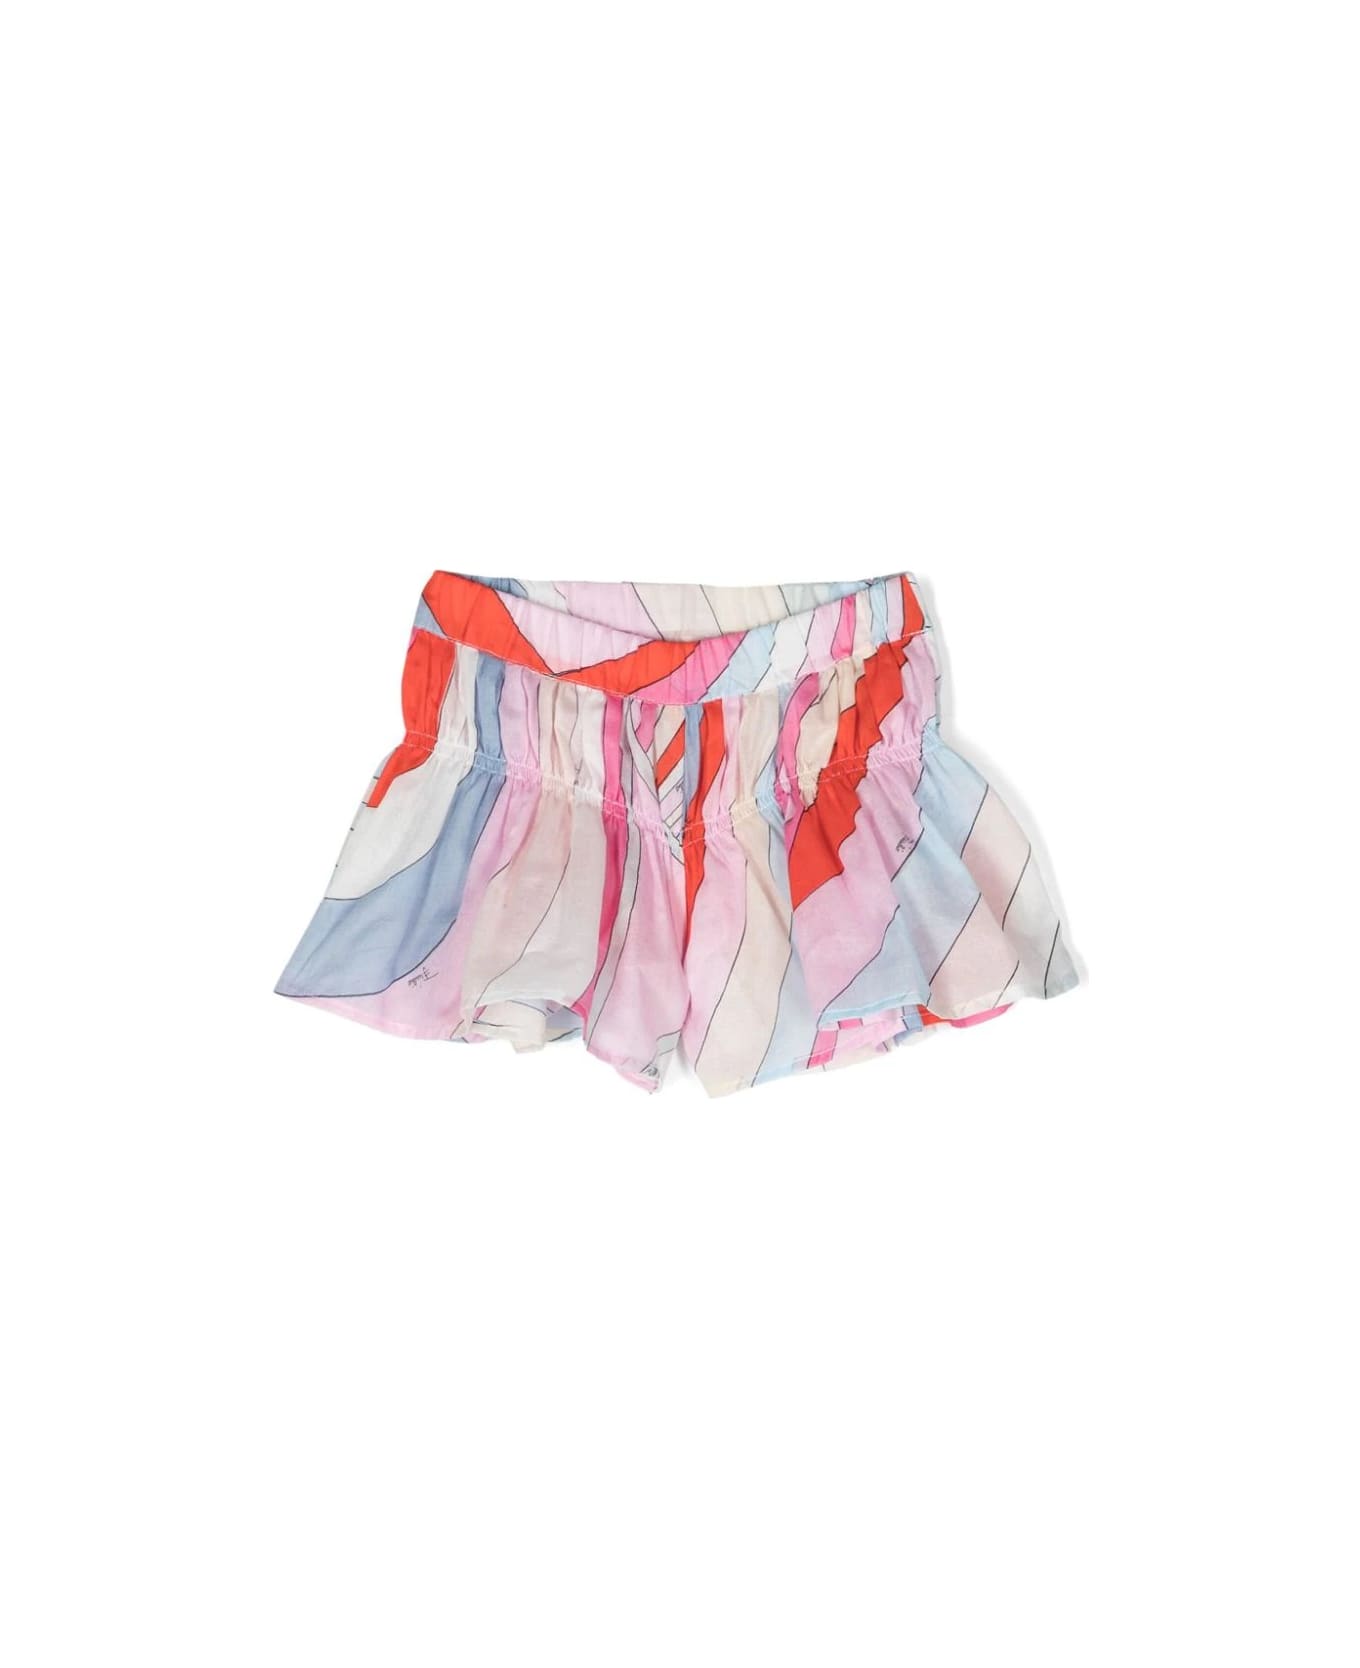 Pucci Flared Shorts With Light Blue/multicolour Iride Print - Blue